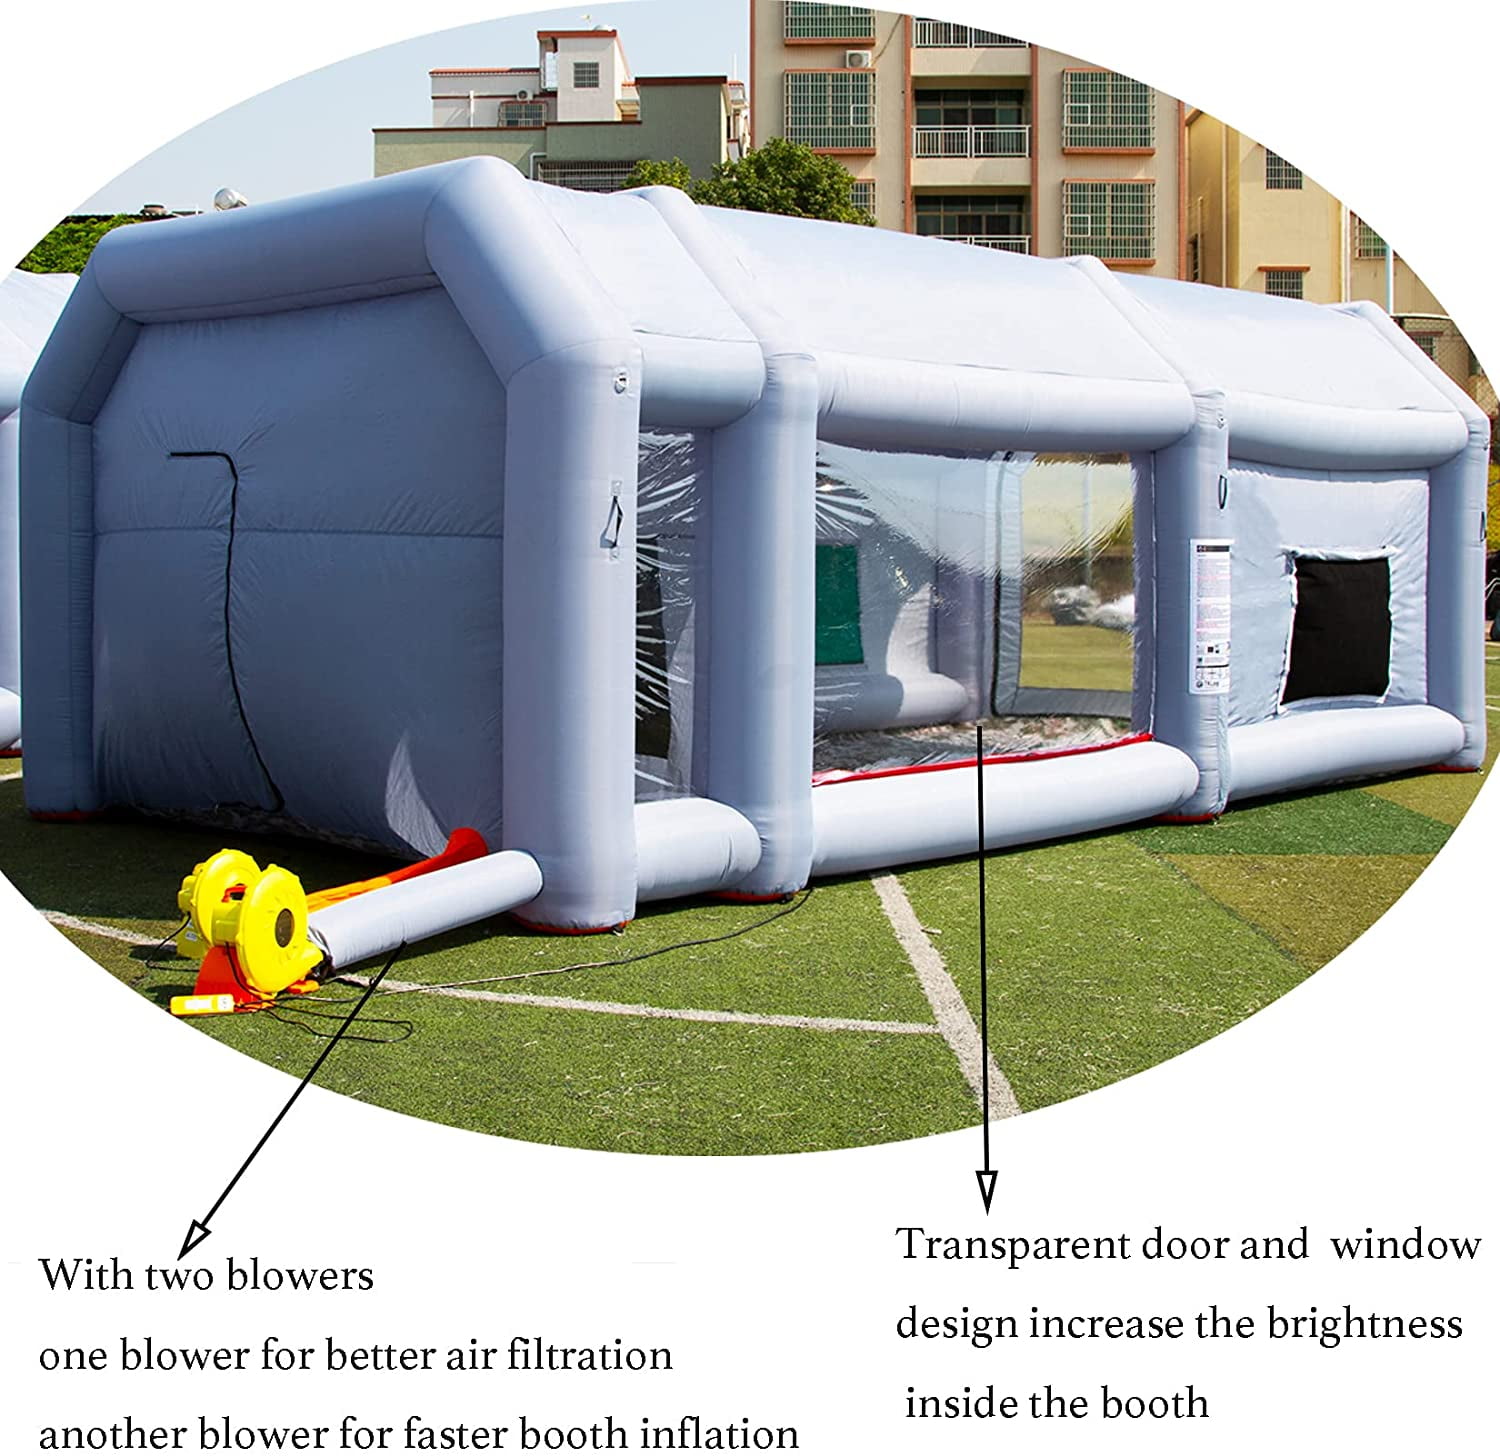 Inflatable Spray Booth Inflatable Paint Booth Tent Inflatable Car Spray  Booth For Sale From Promotion_factory, $1,096.47